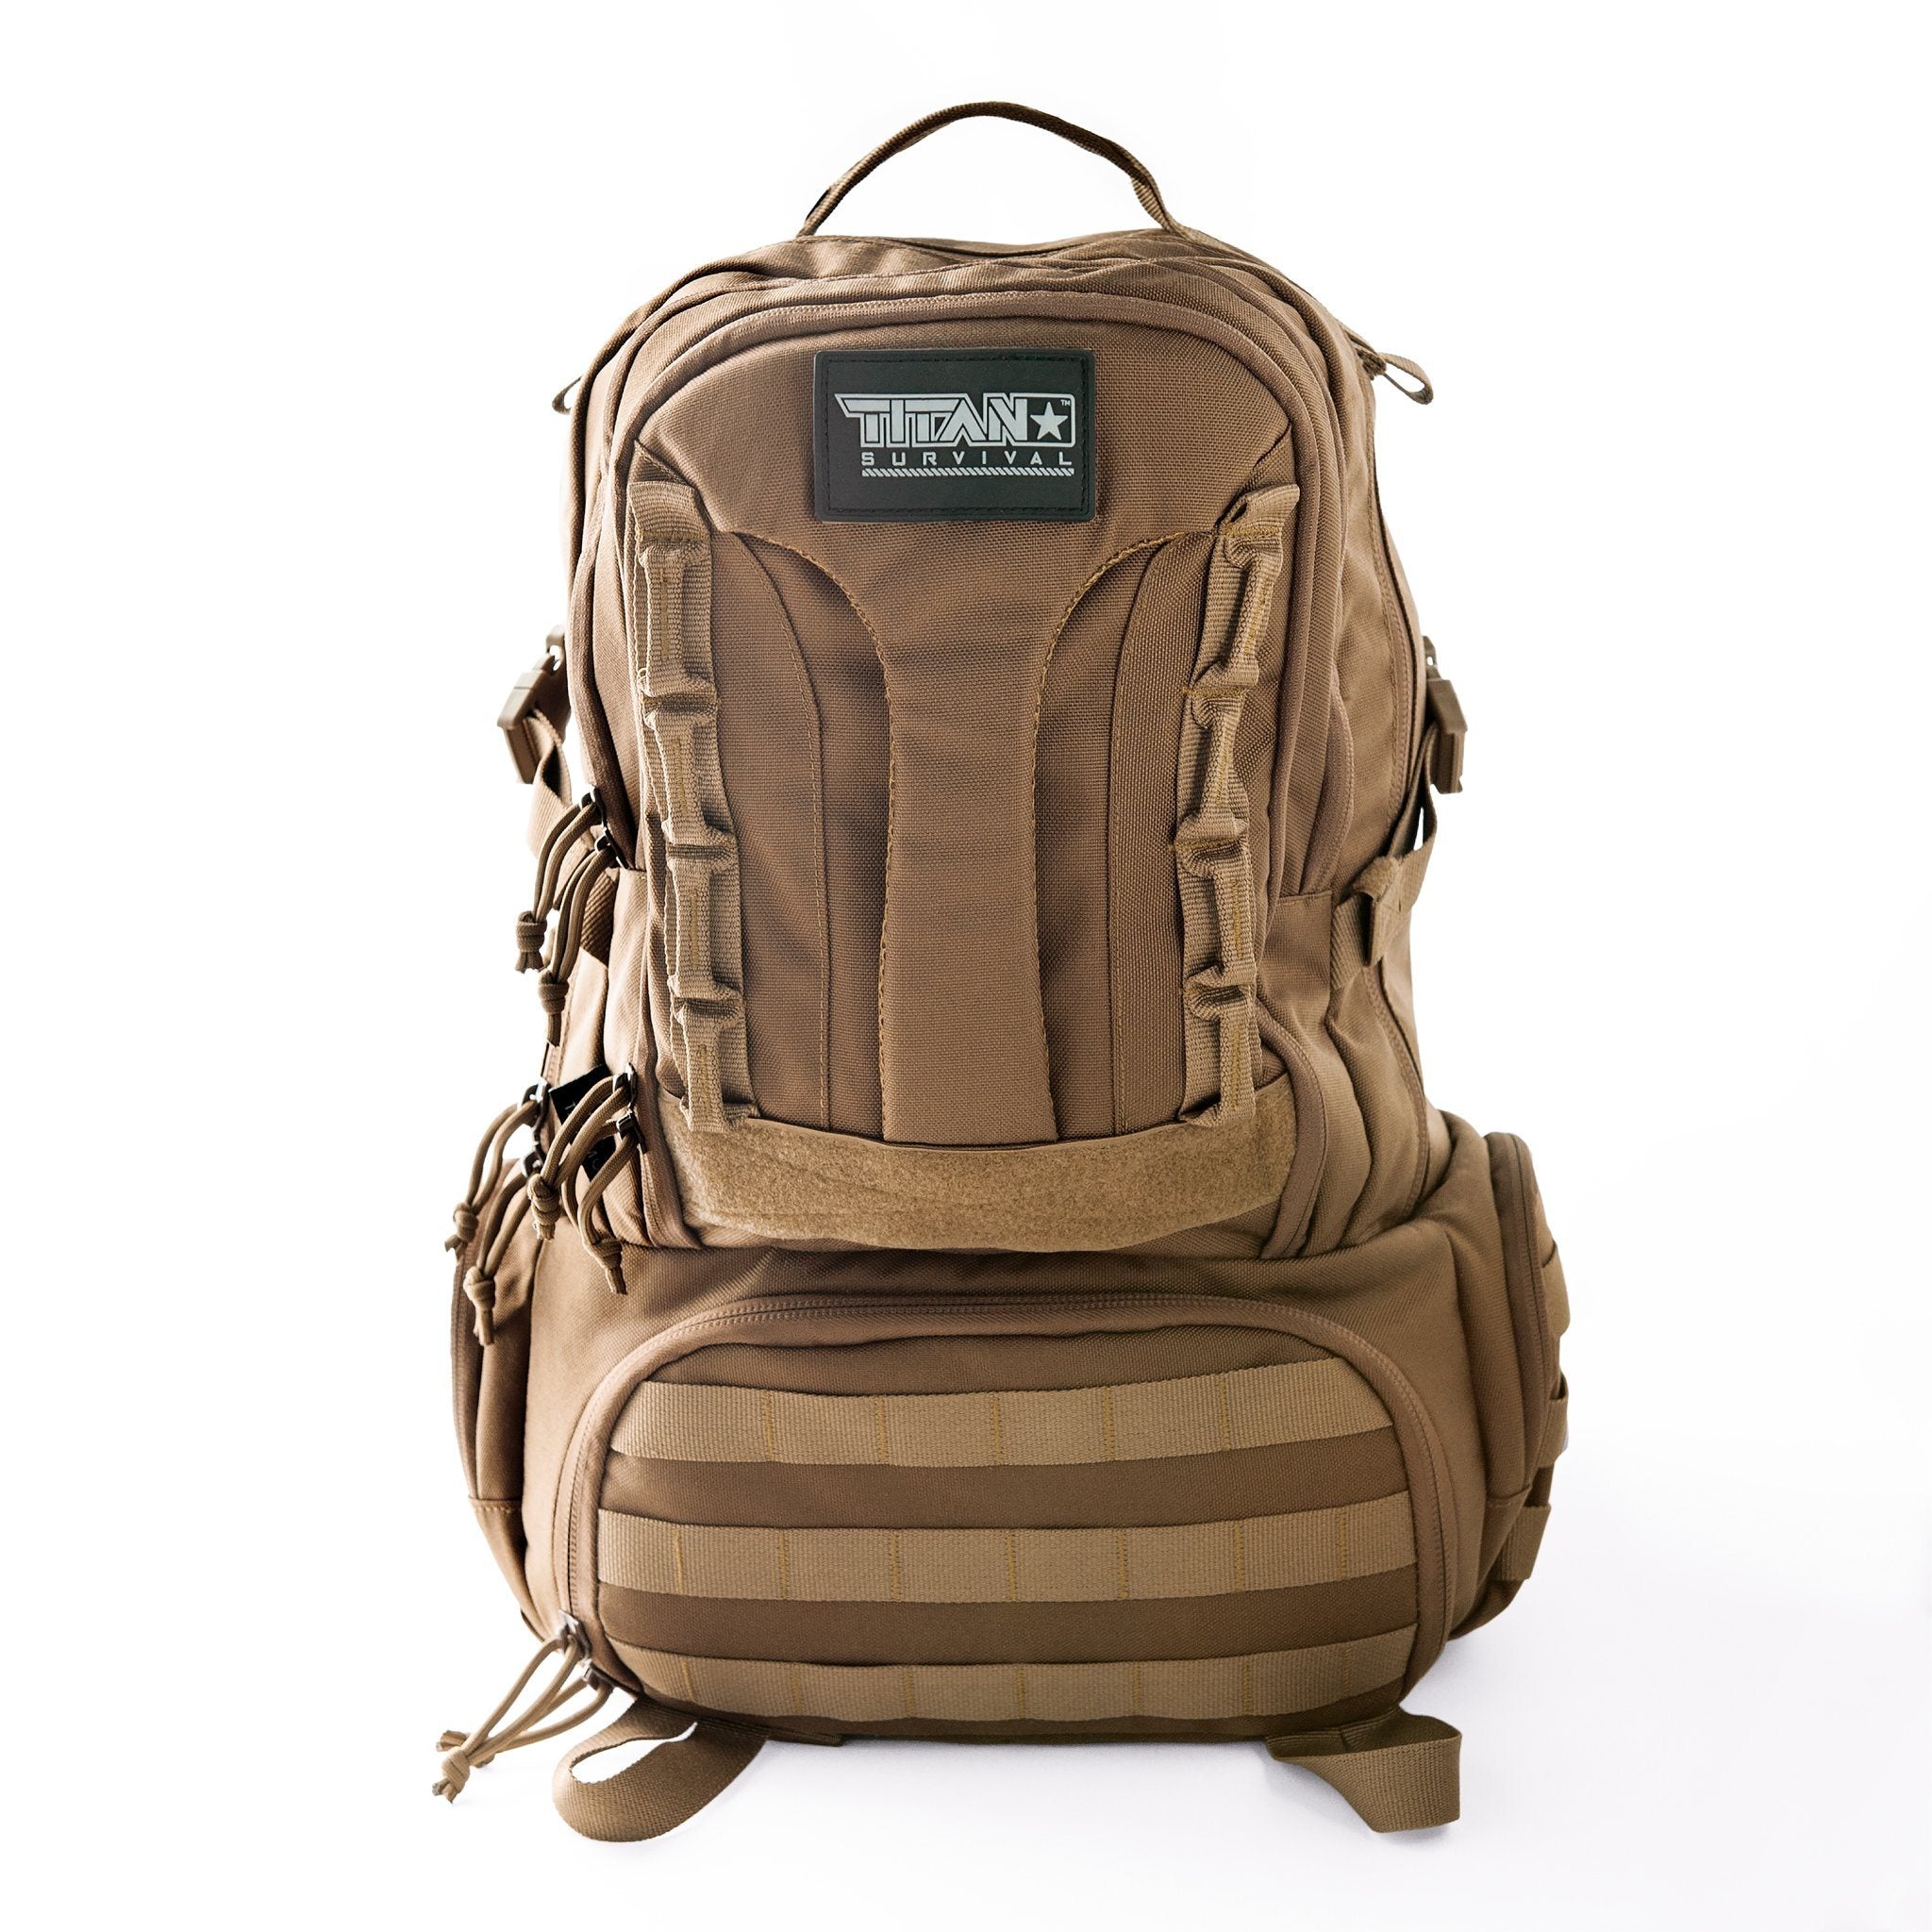 BC50 72-Hour Tactical Backpack | TITAN Survival